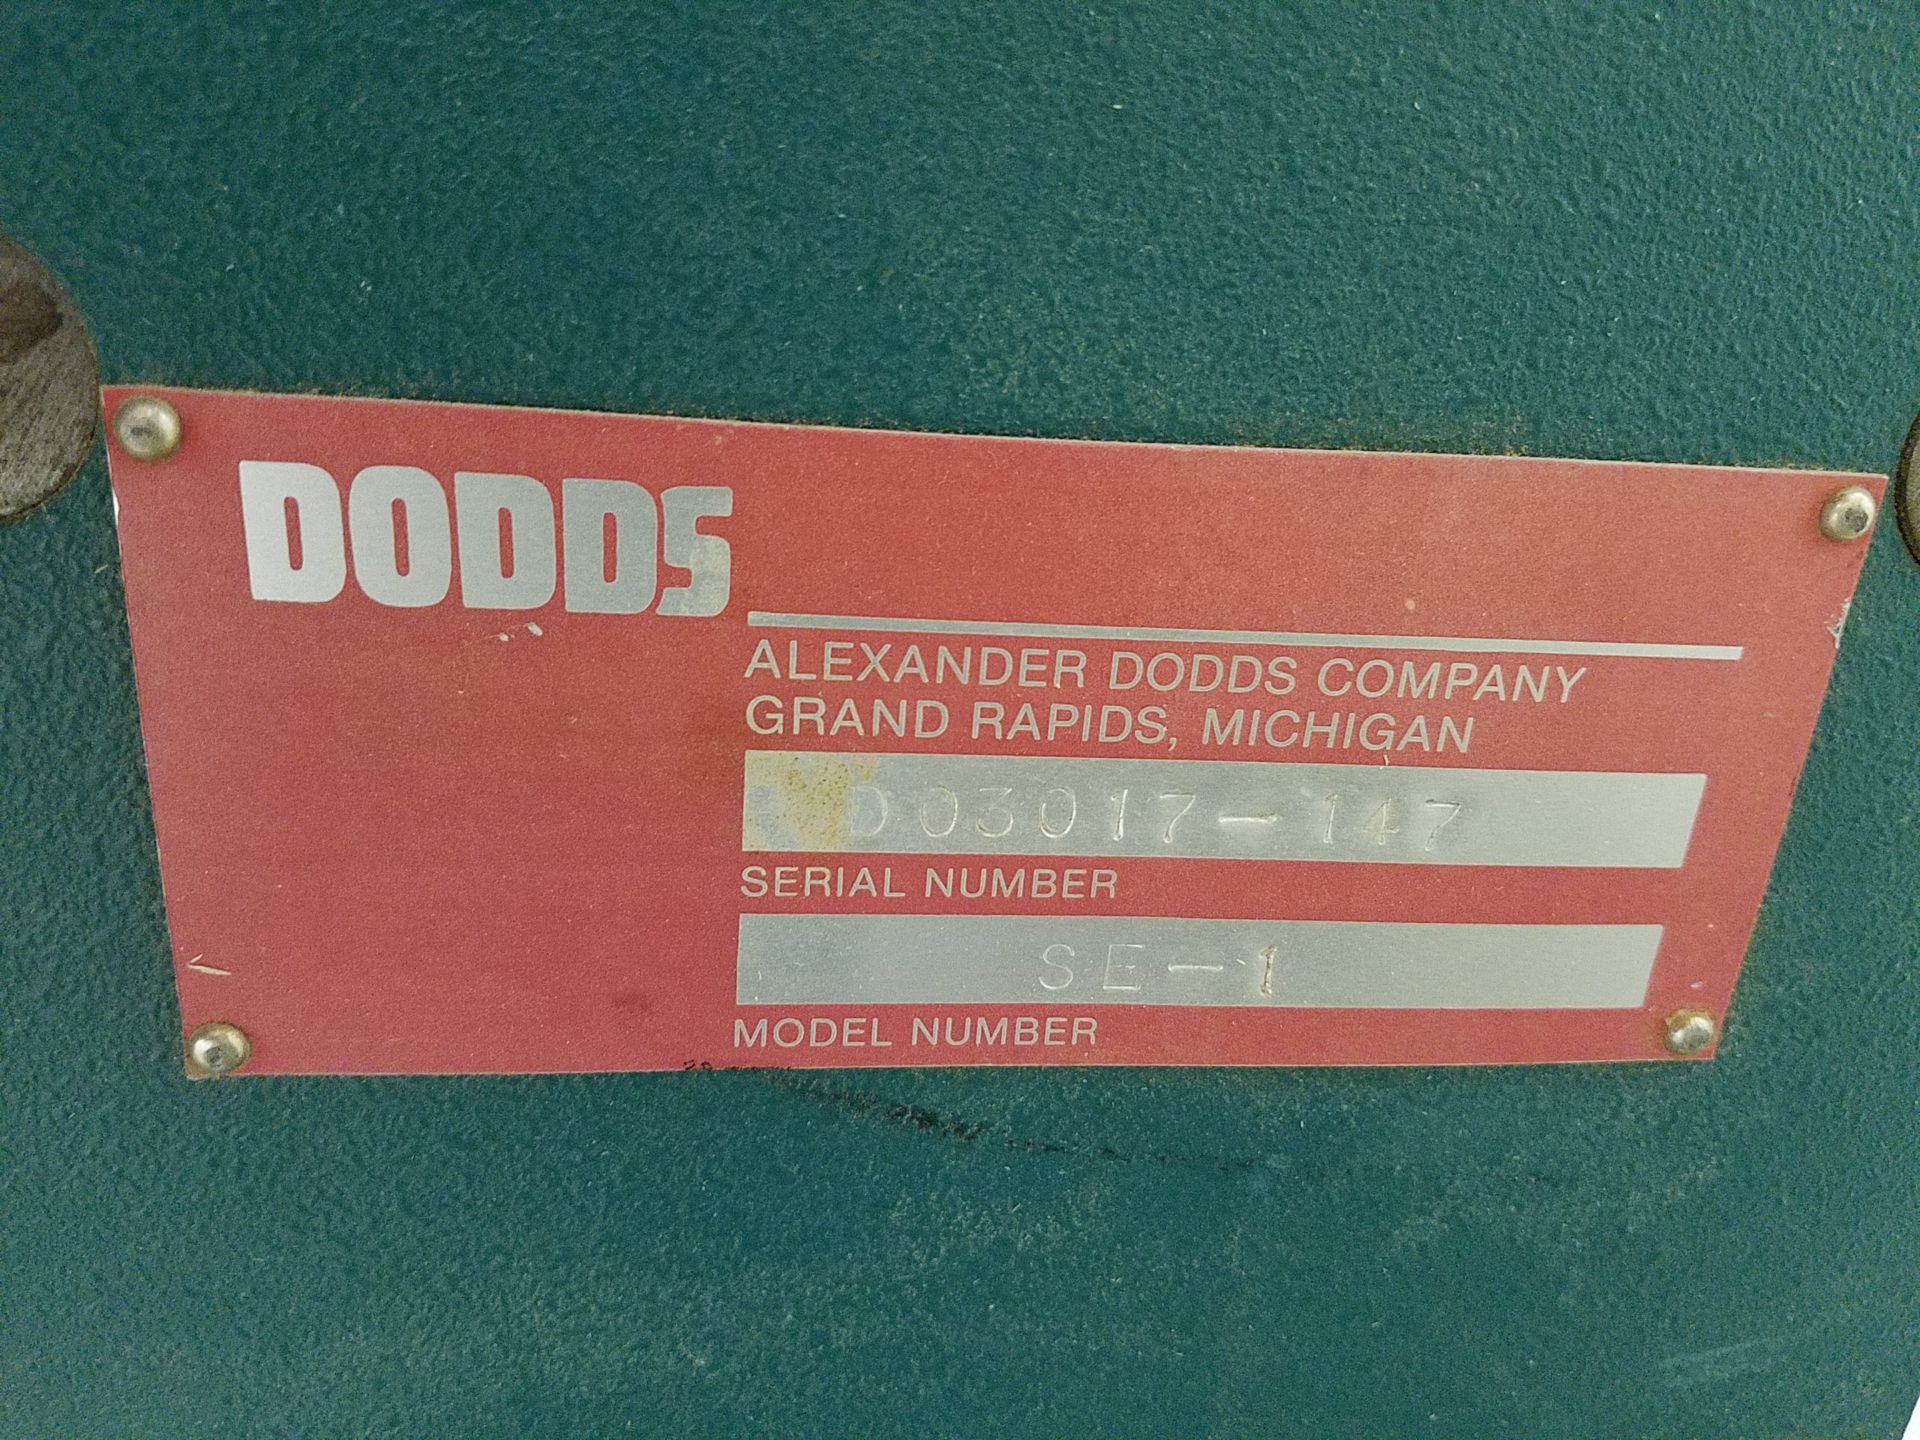 Dodds Model SE-1 Single-Spindle Dovetailer, s/n 003017, 16,000 RPM, 15 in Capacity, 1 1/2 HP, 220, 1 - Image 8 of 10